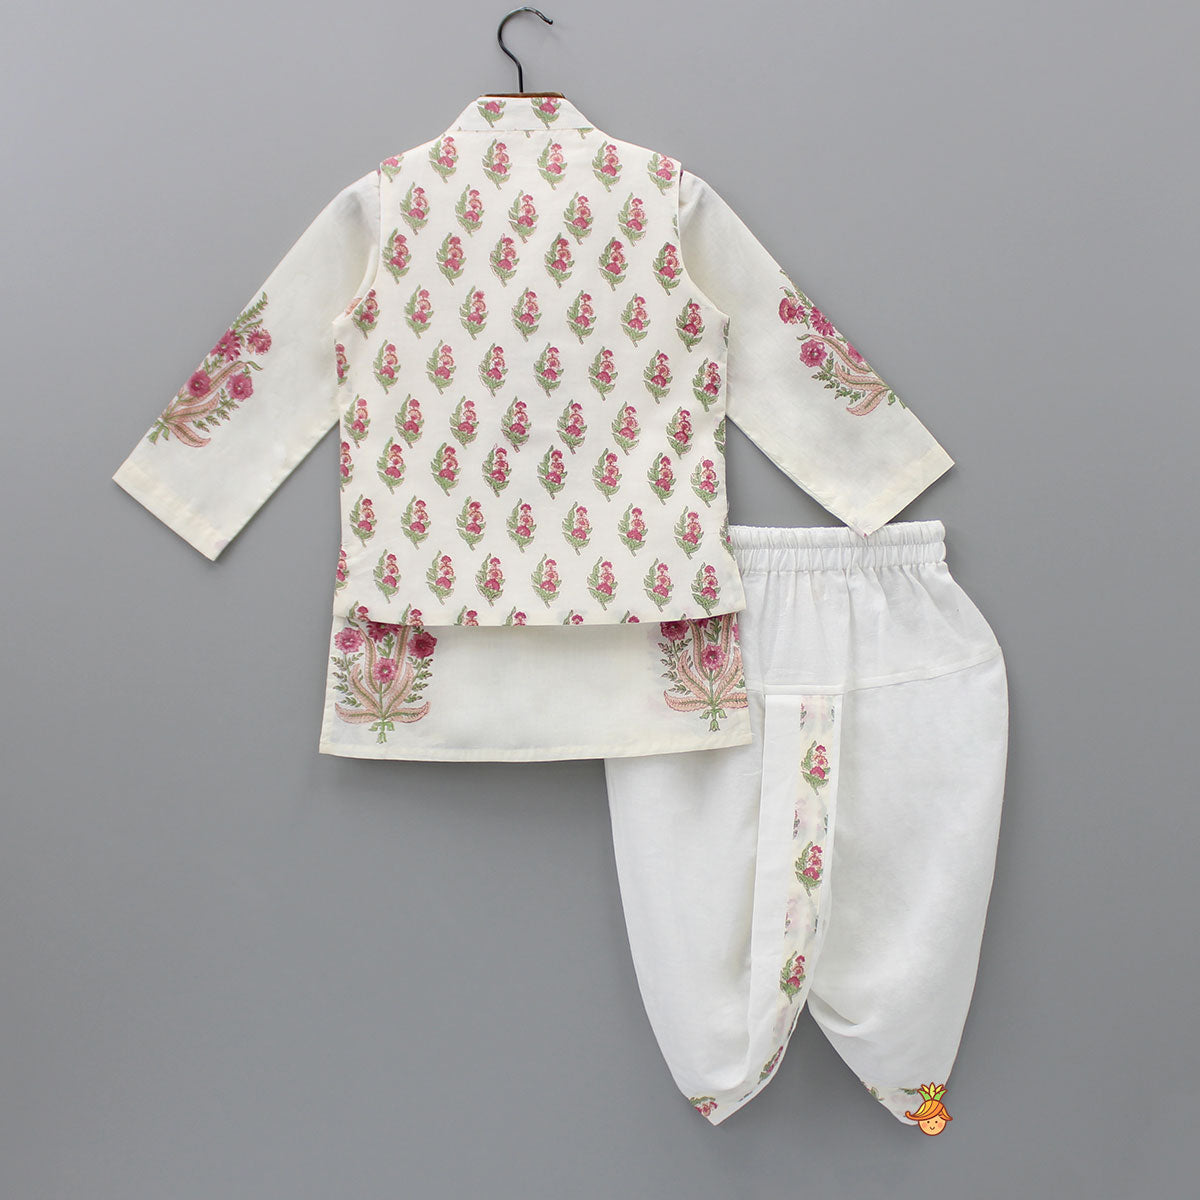 Pre Order: Floral Printed Kurta With Handworked Jacket And Dhoti.